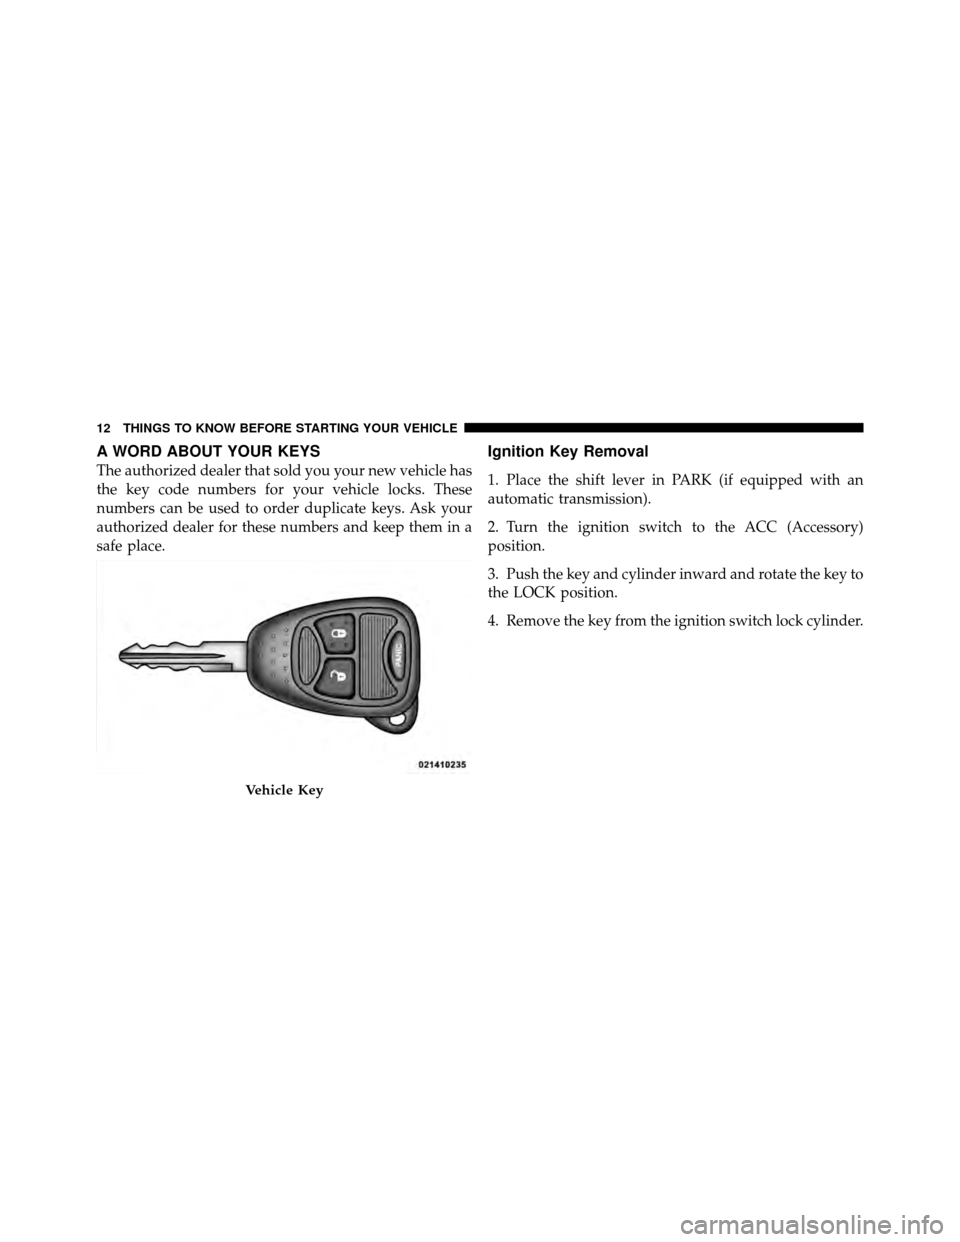 JEEP PATRIOT 2011 1.G User Guide A WORD ABOUT YOUR KEYS
The authorized dealer that sold you your new vehicle has
the key code numbers for your vehicle locks. These
numbers can be used to order duplicate keys. Ask your
authorized deal